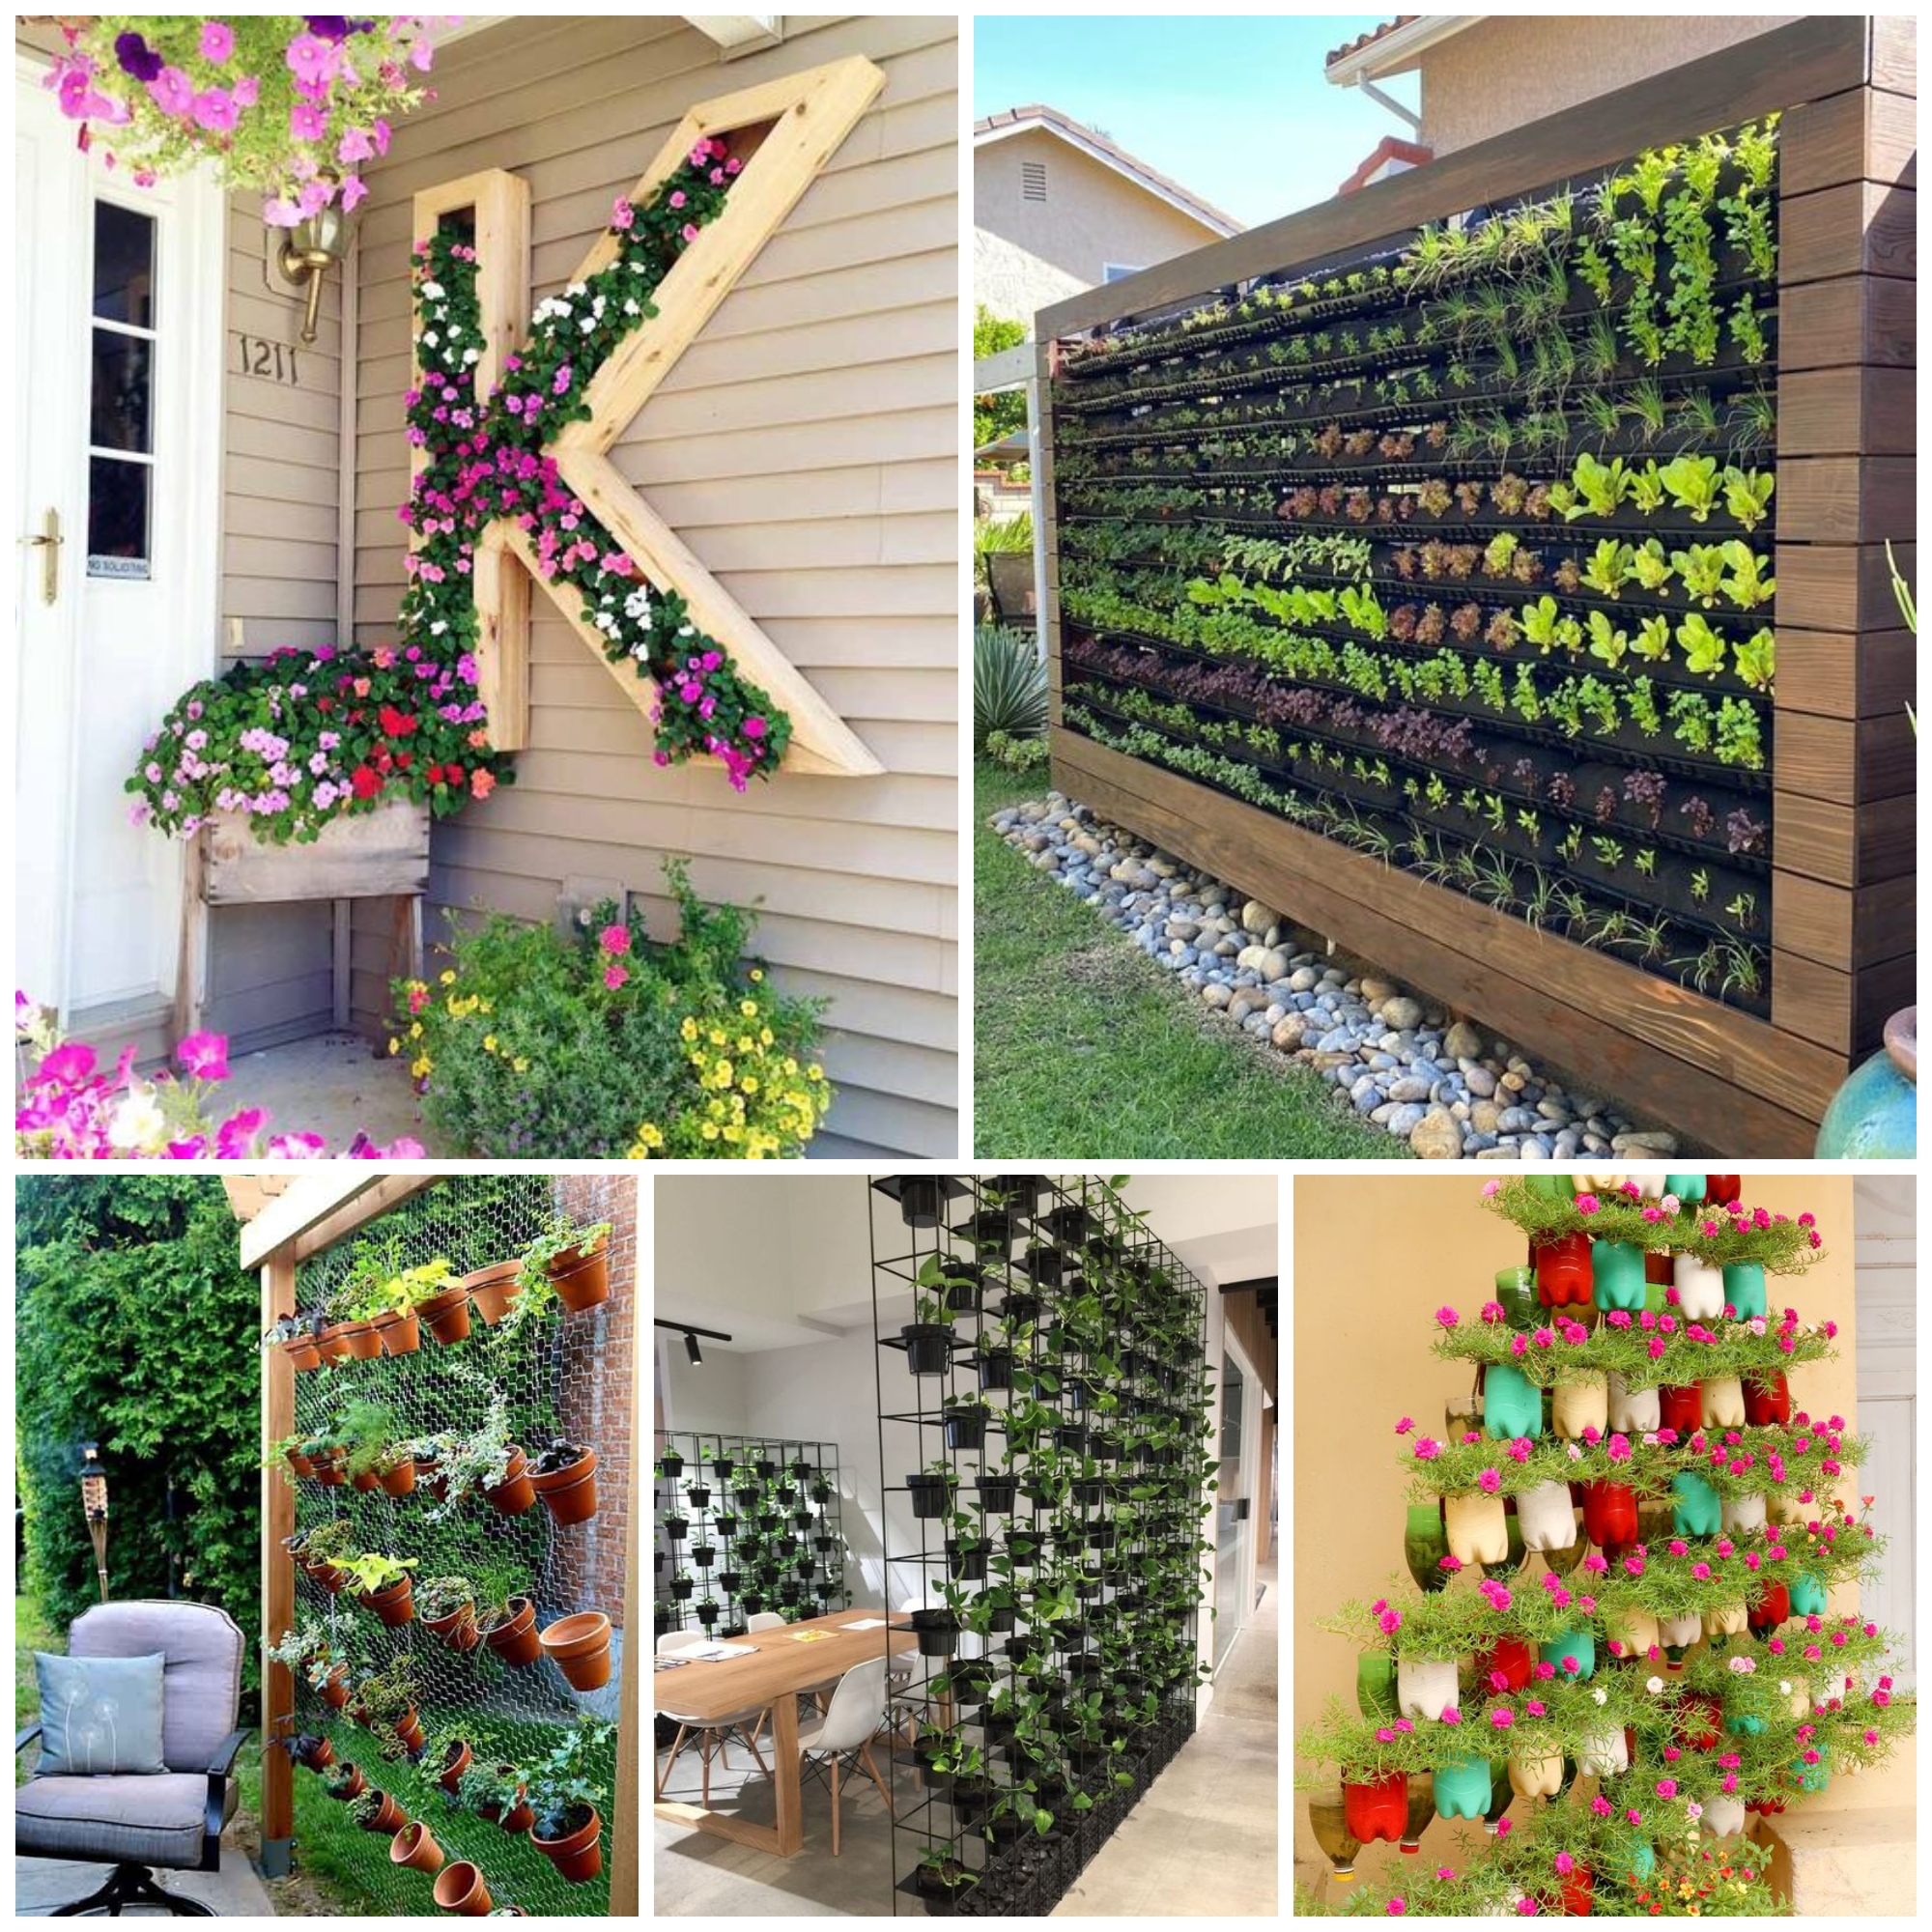 DIY ideas that will boost the beauty of your yard and garden